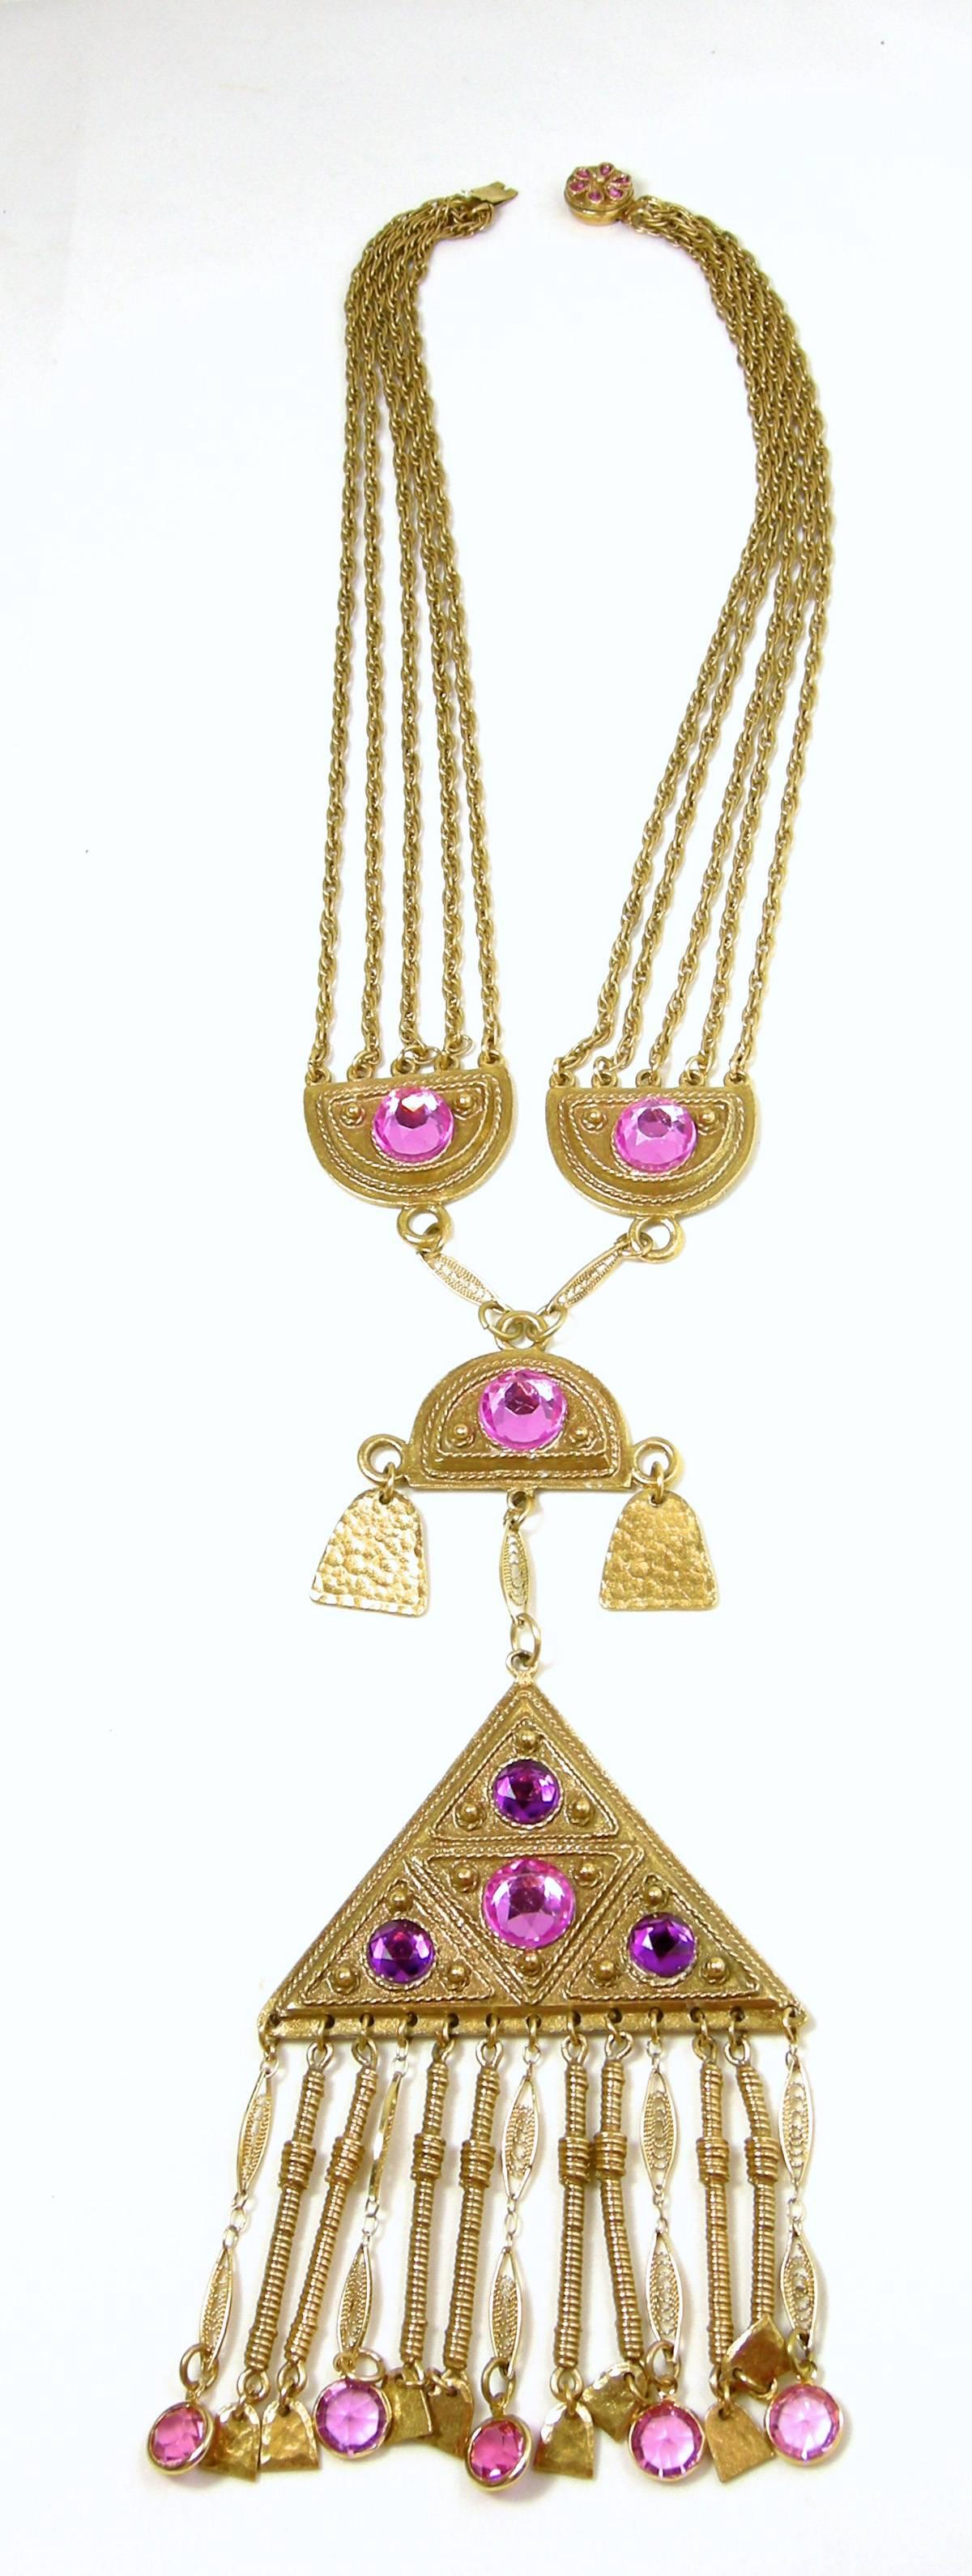 This is an extraordinarily large vintage Vendome necklace from the1960s. It features a triangular shaped centerpiece that has fringes with purple and pink round faceted crystals. It has 3 half-moon shaped vintage gold tone metal pieces on top